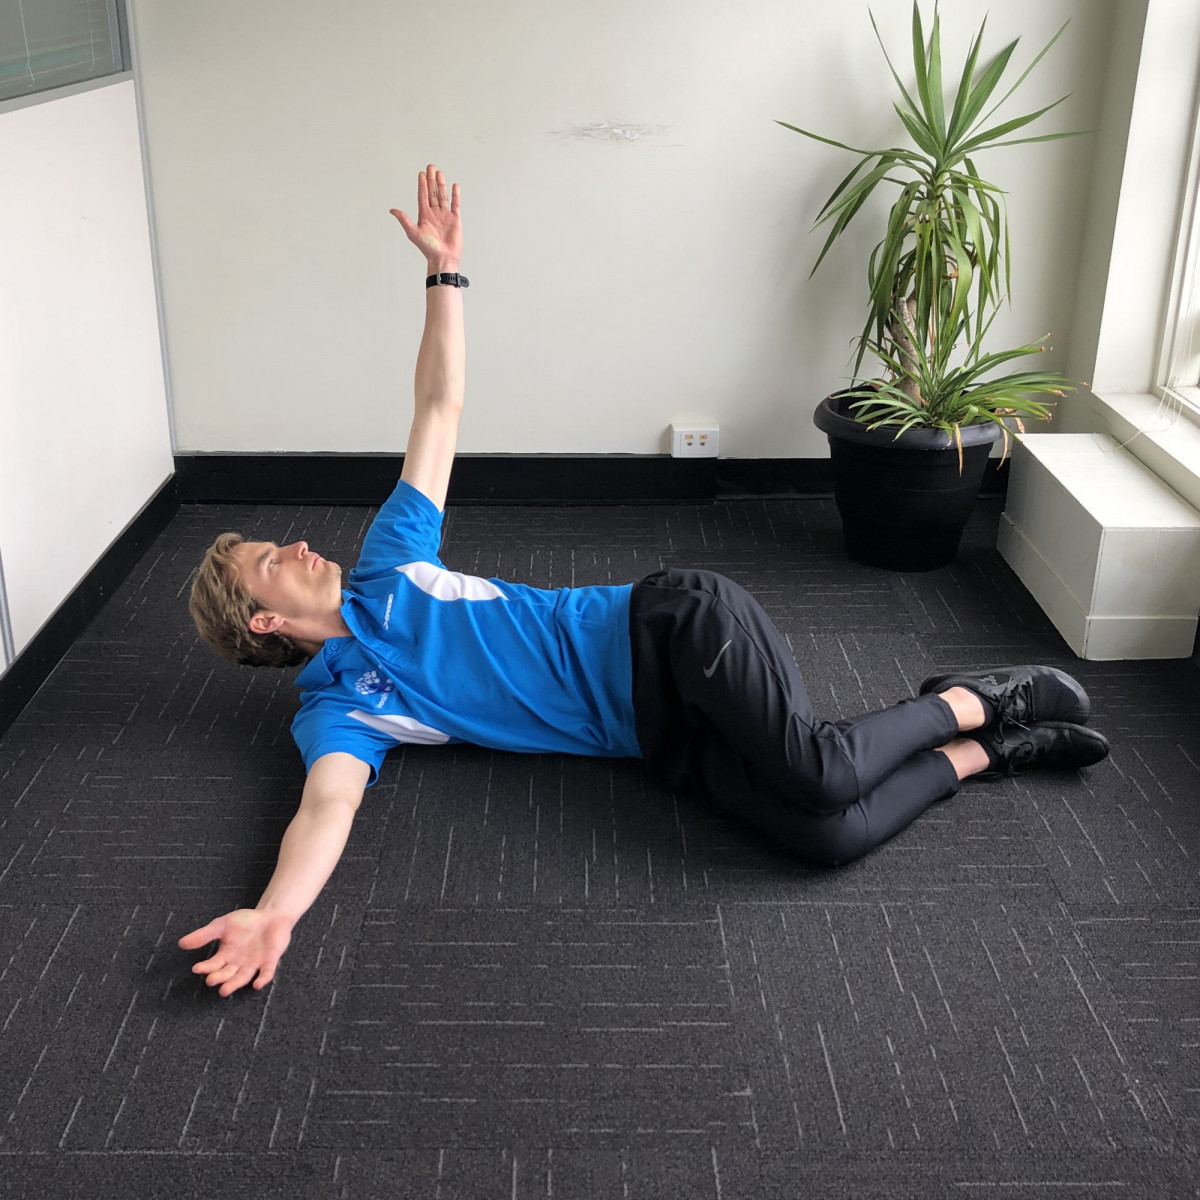 Rotational exercises: More flexibility for the spine